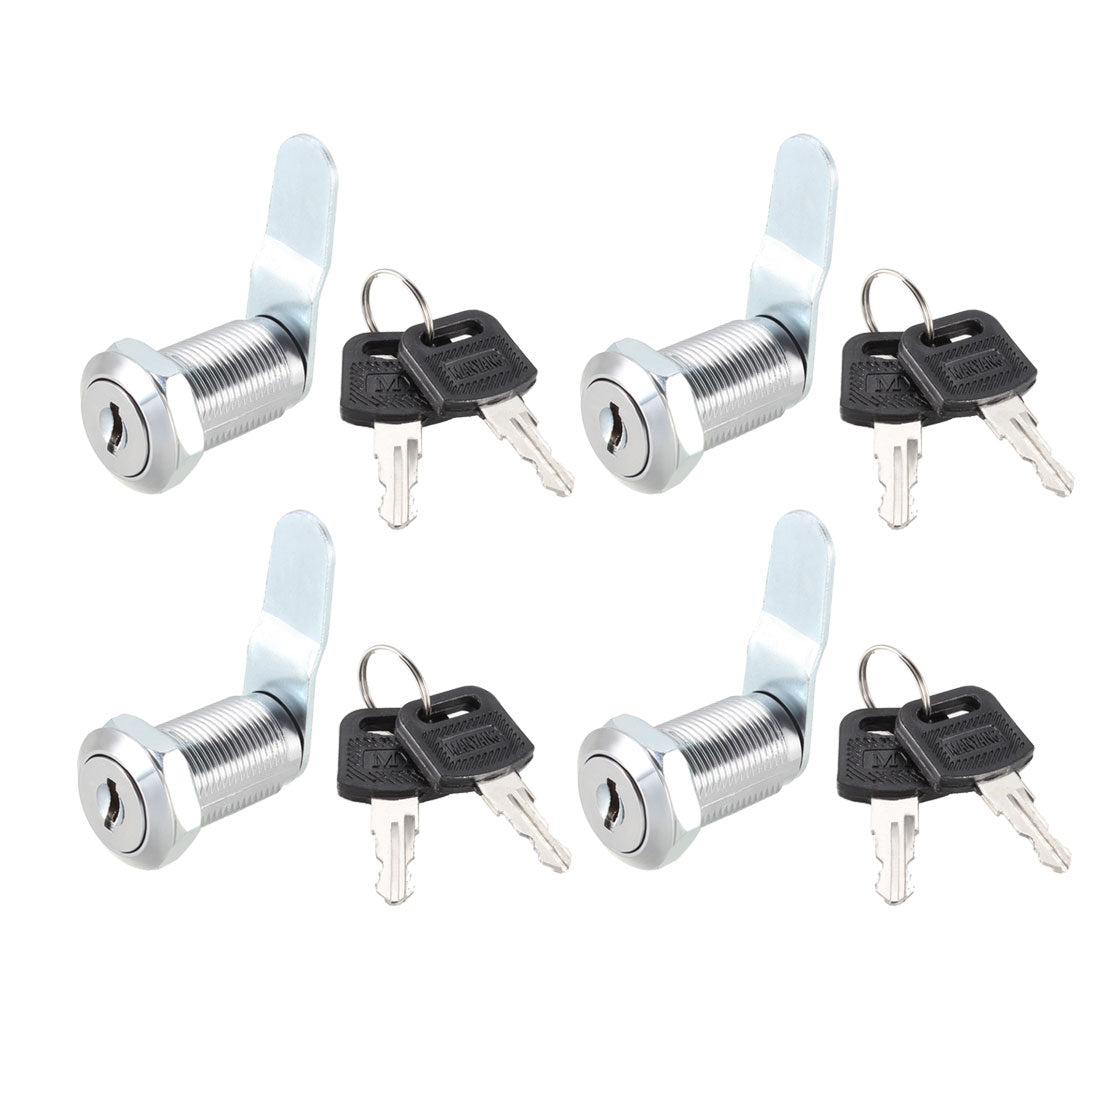 uxcell Uxcell Cam Lock 30mm Cylinder Length Fit on Max 7/8-inch Panel Keyed Different 4Pcs